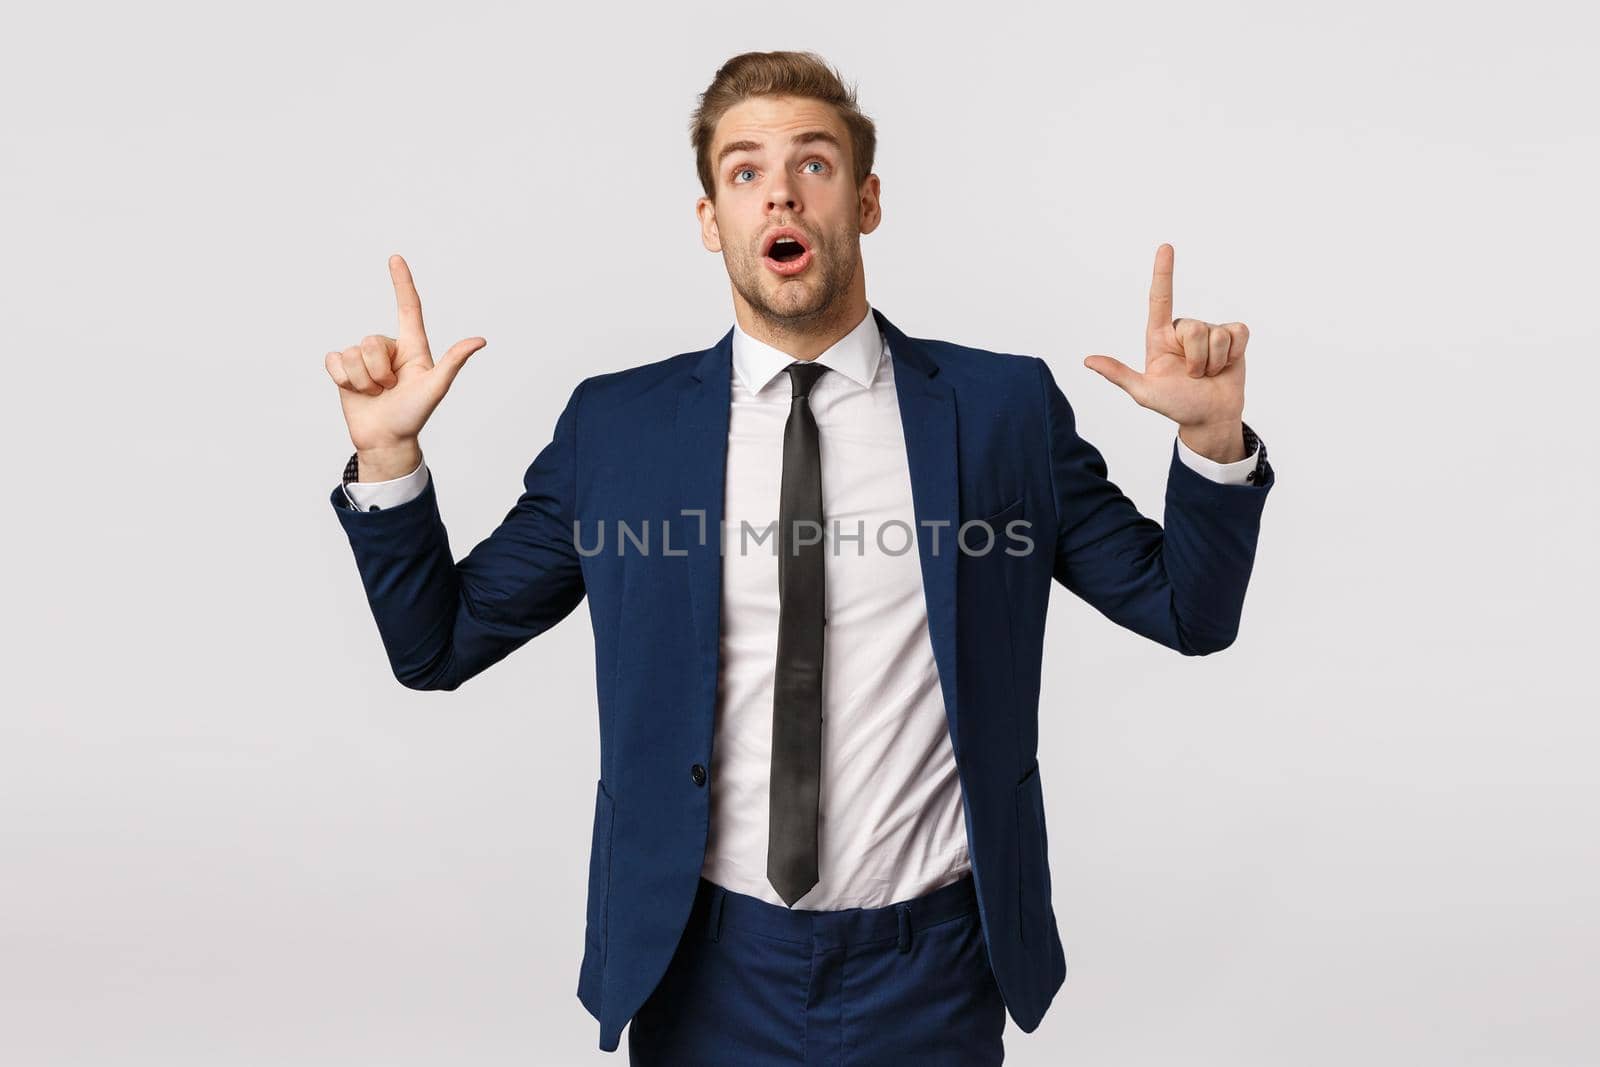 Speechless young man in suit seeing incredible offer, breathtaking scene. Attractive young businessman unshaved standing white background, looking pointing up, open mouth in awe and amazement.